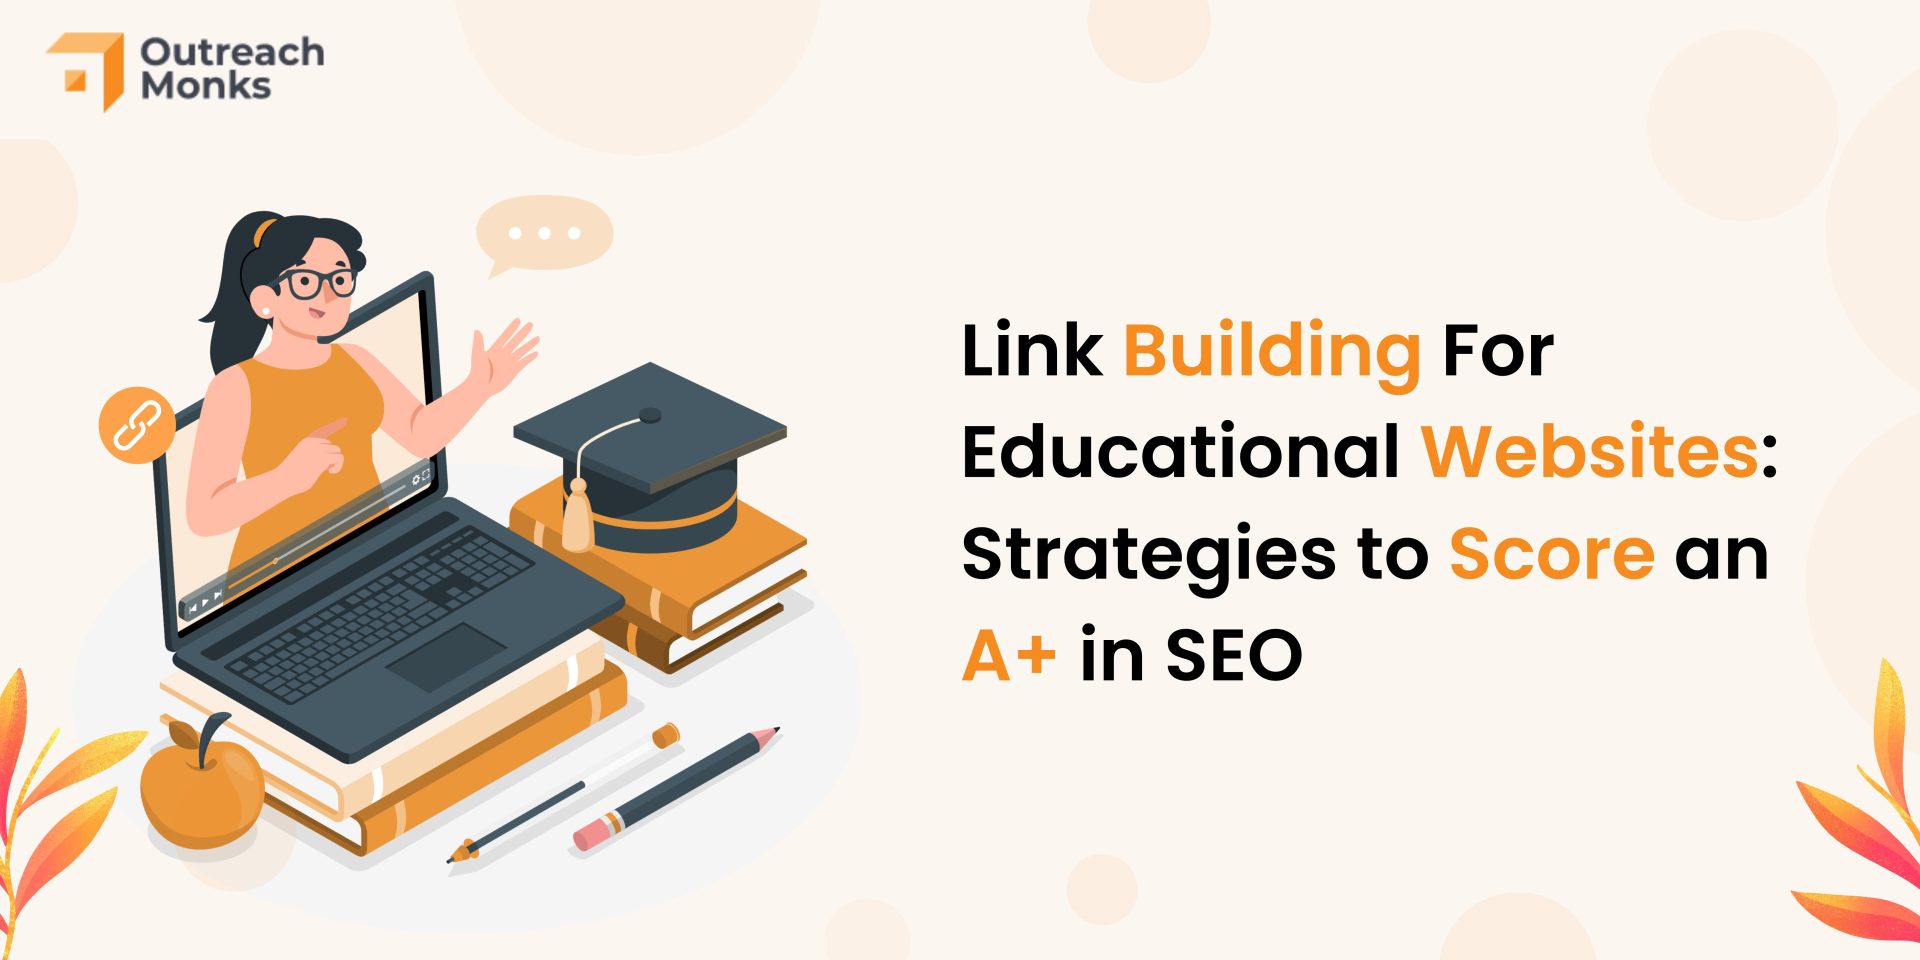 Link Building For Educational Websites: Strategies to Score an A+ in SEO